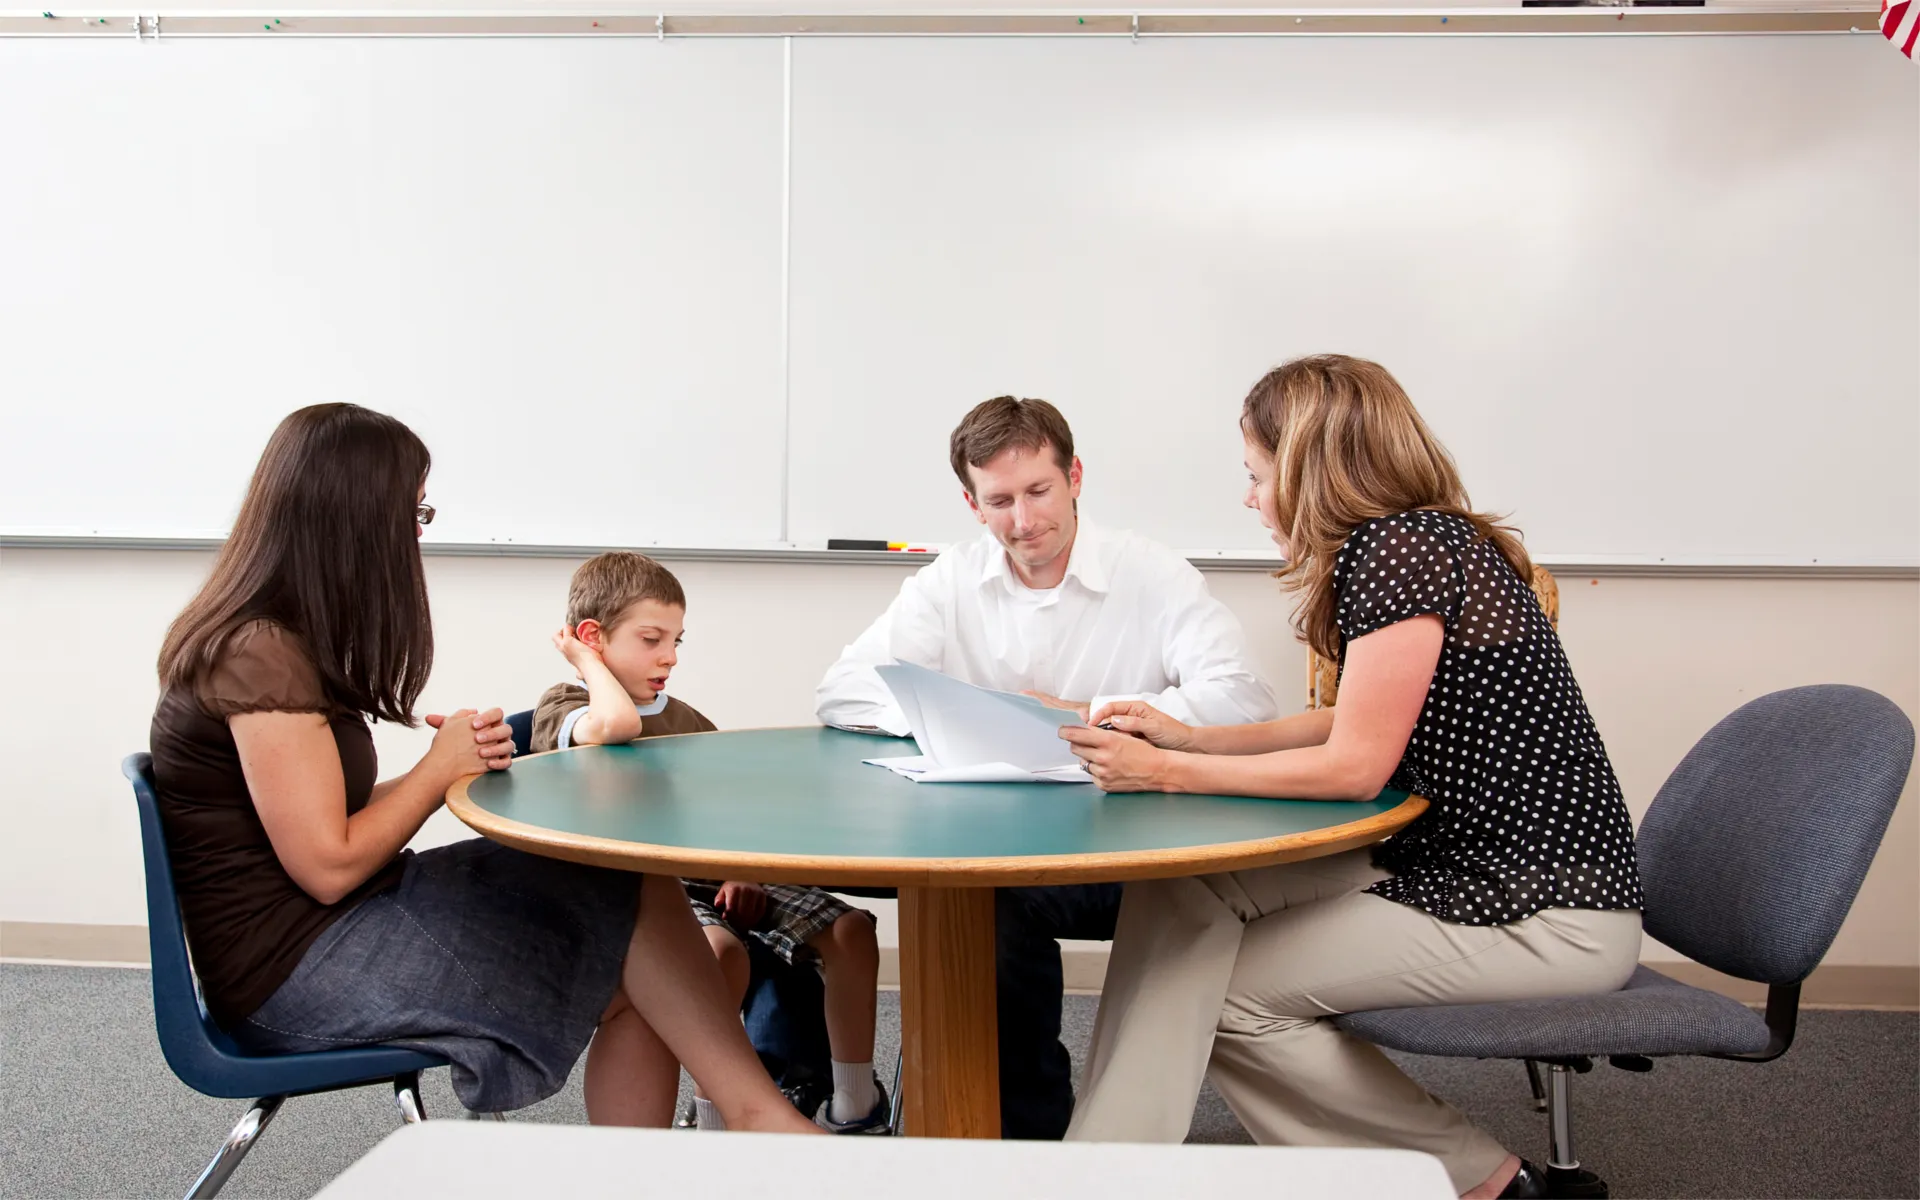 10 Tips to Get the Most out of a Parent-Teacher Conference